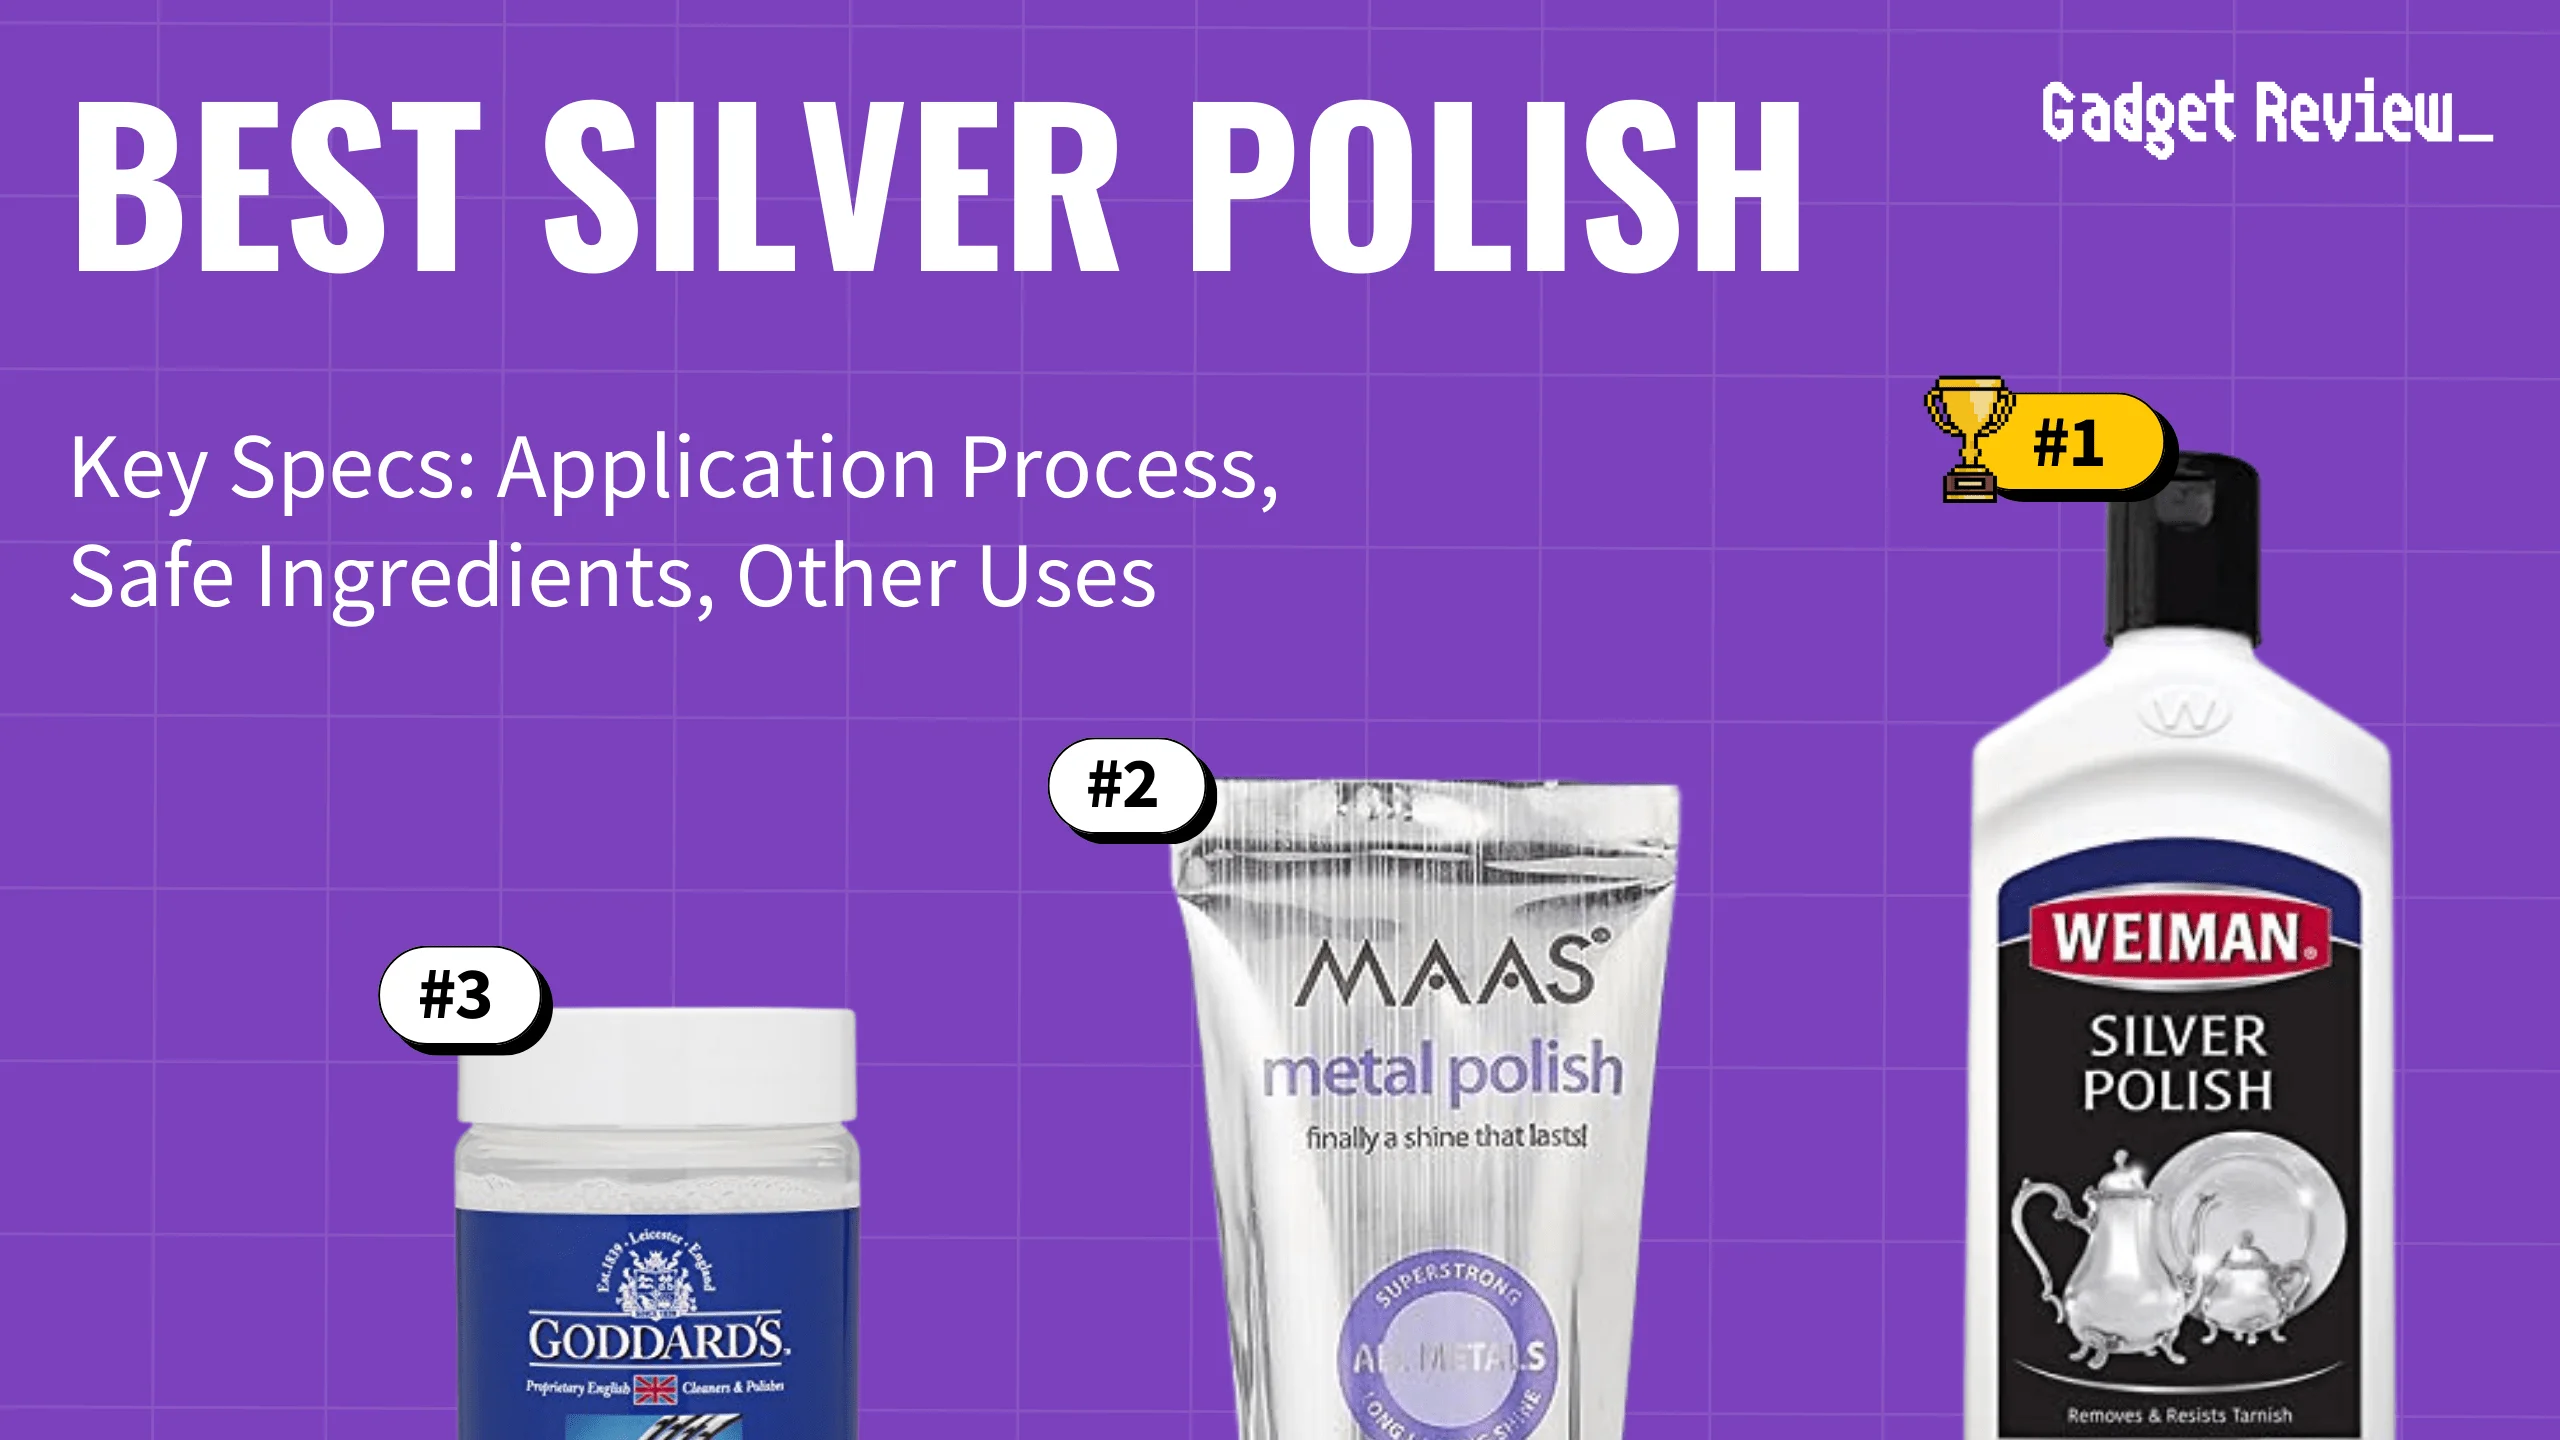 Best Silver Polish - Top Options